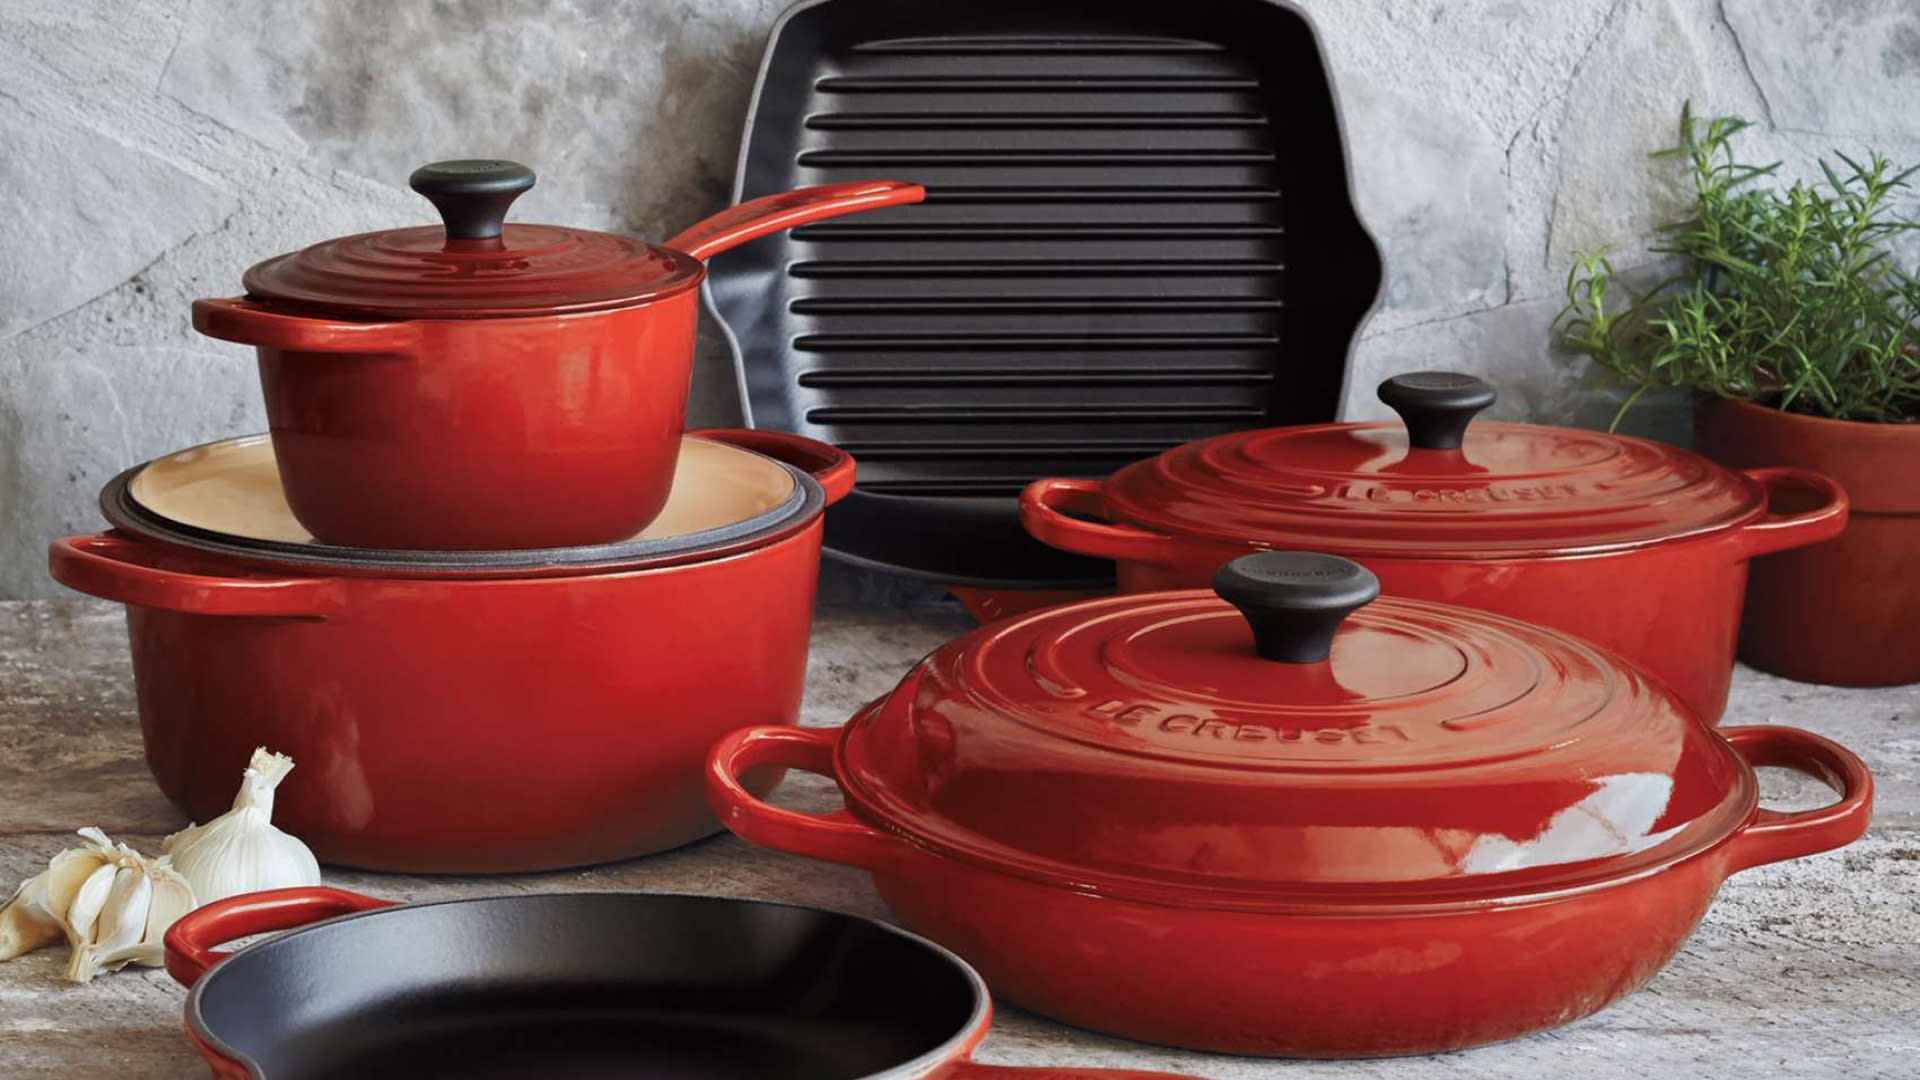 Nordstrom Is Selling Le Creuset Cookware for Up to 40 Percent Off